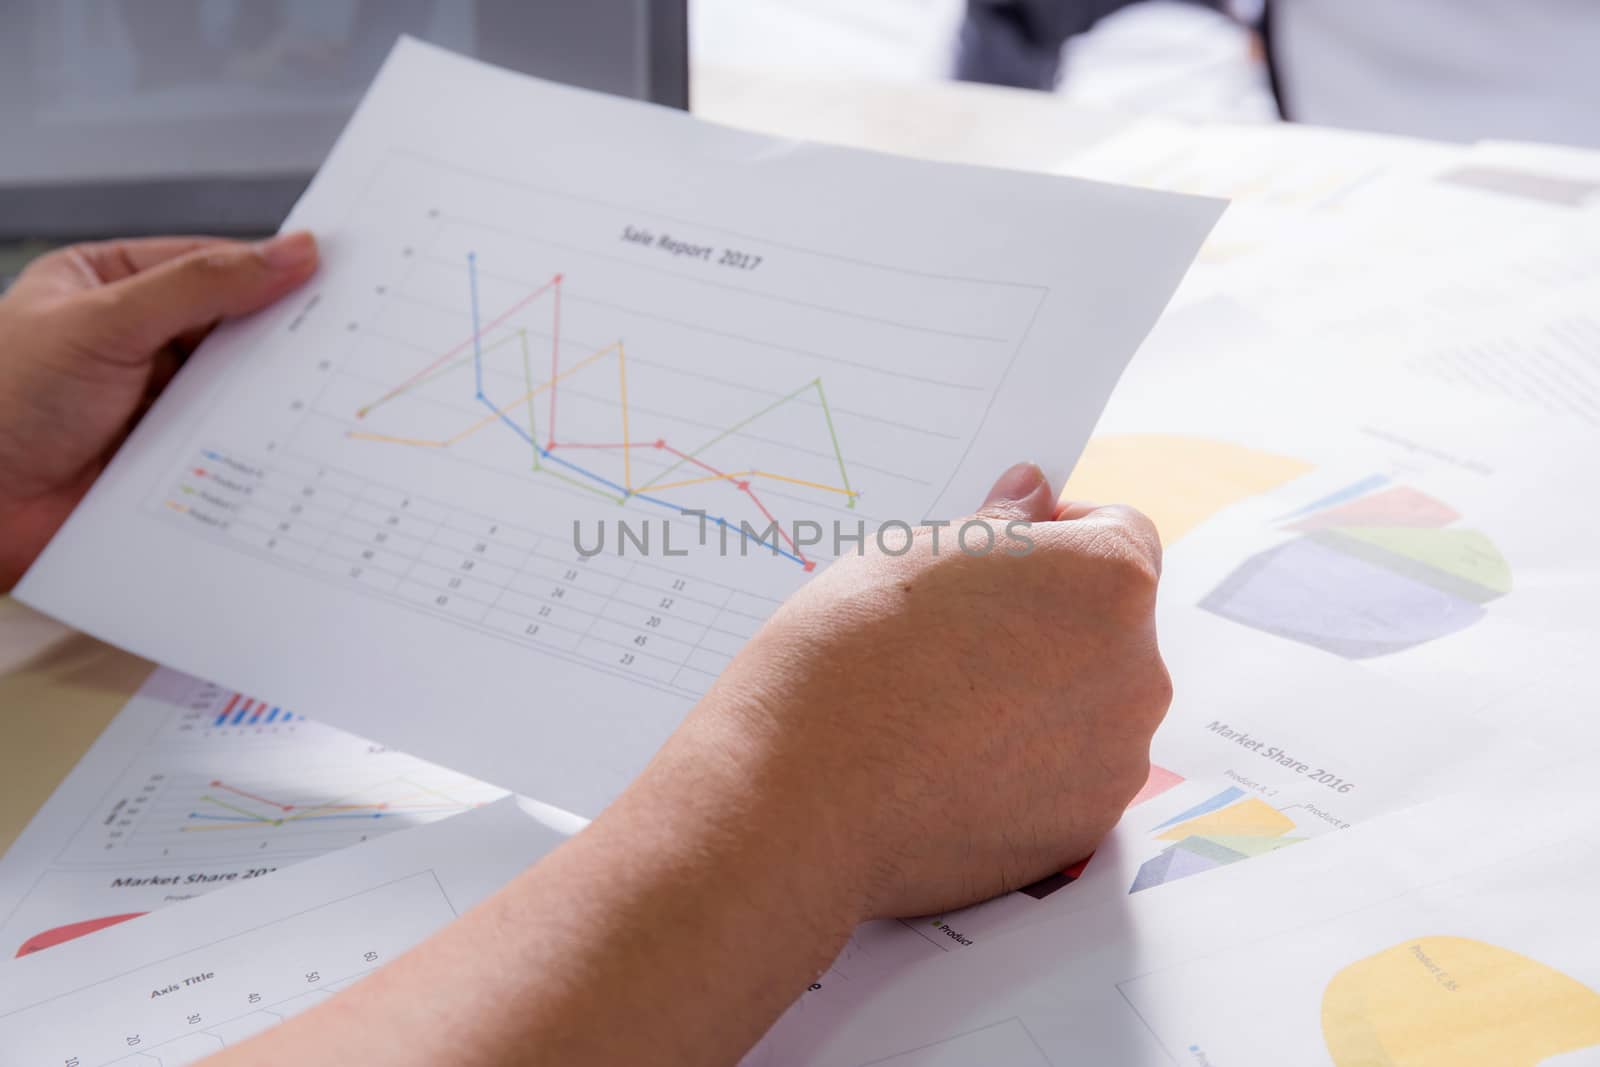 Financial paper charts with hold hand, graphs and notebook on the table